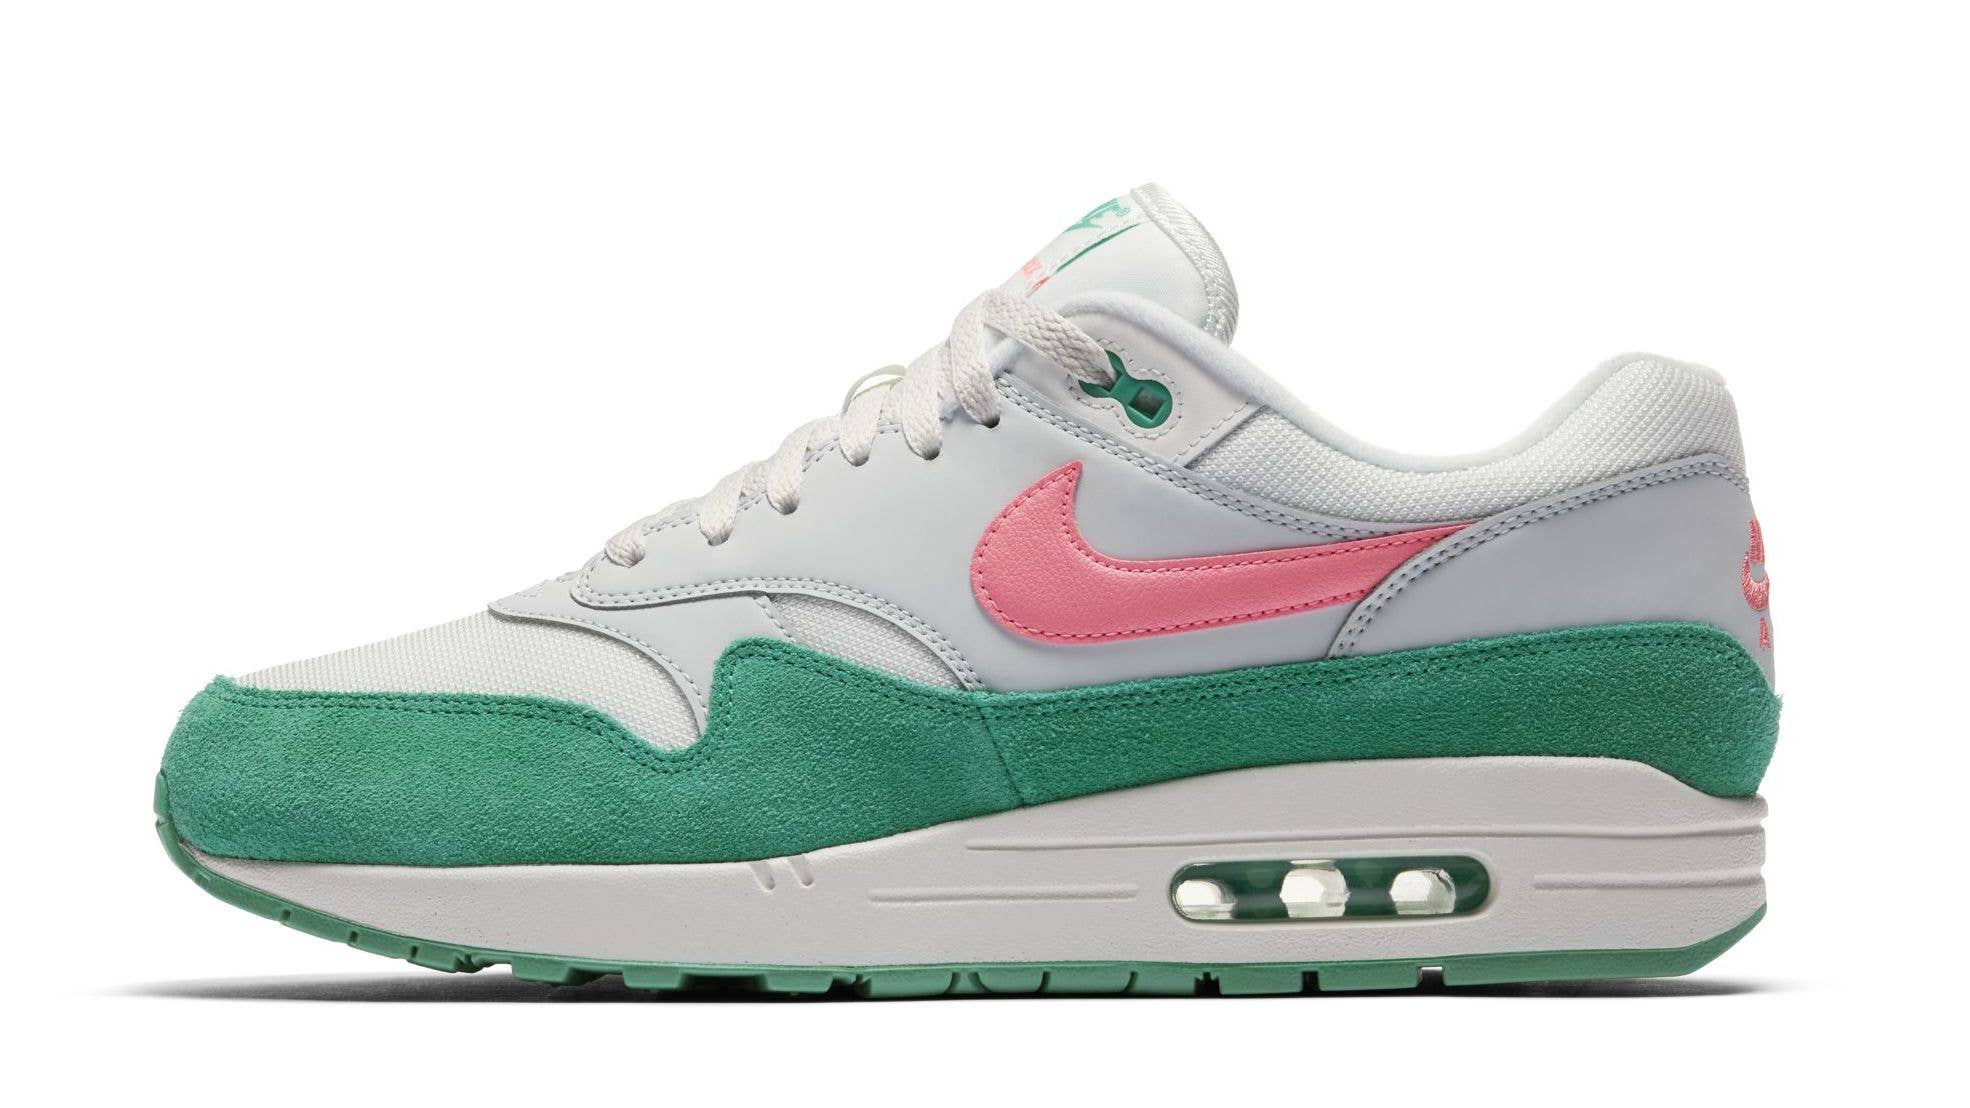 More 'OG' Style Air Max 1s Coming Complex